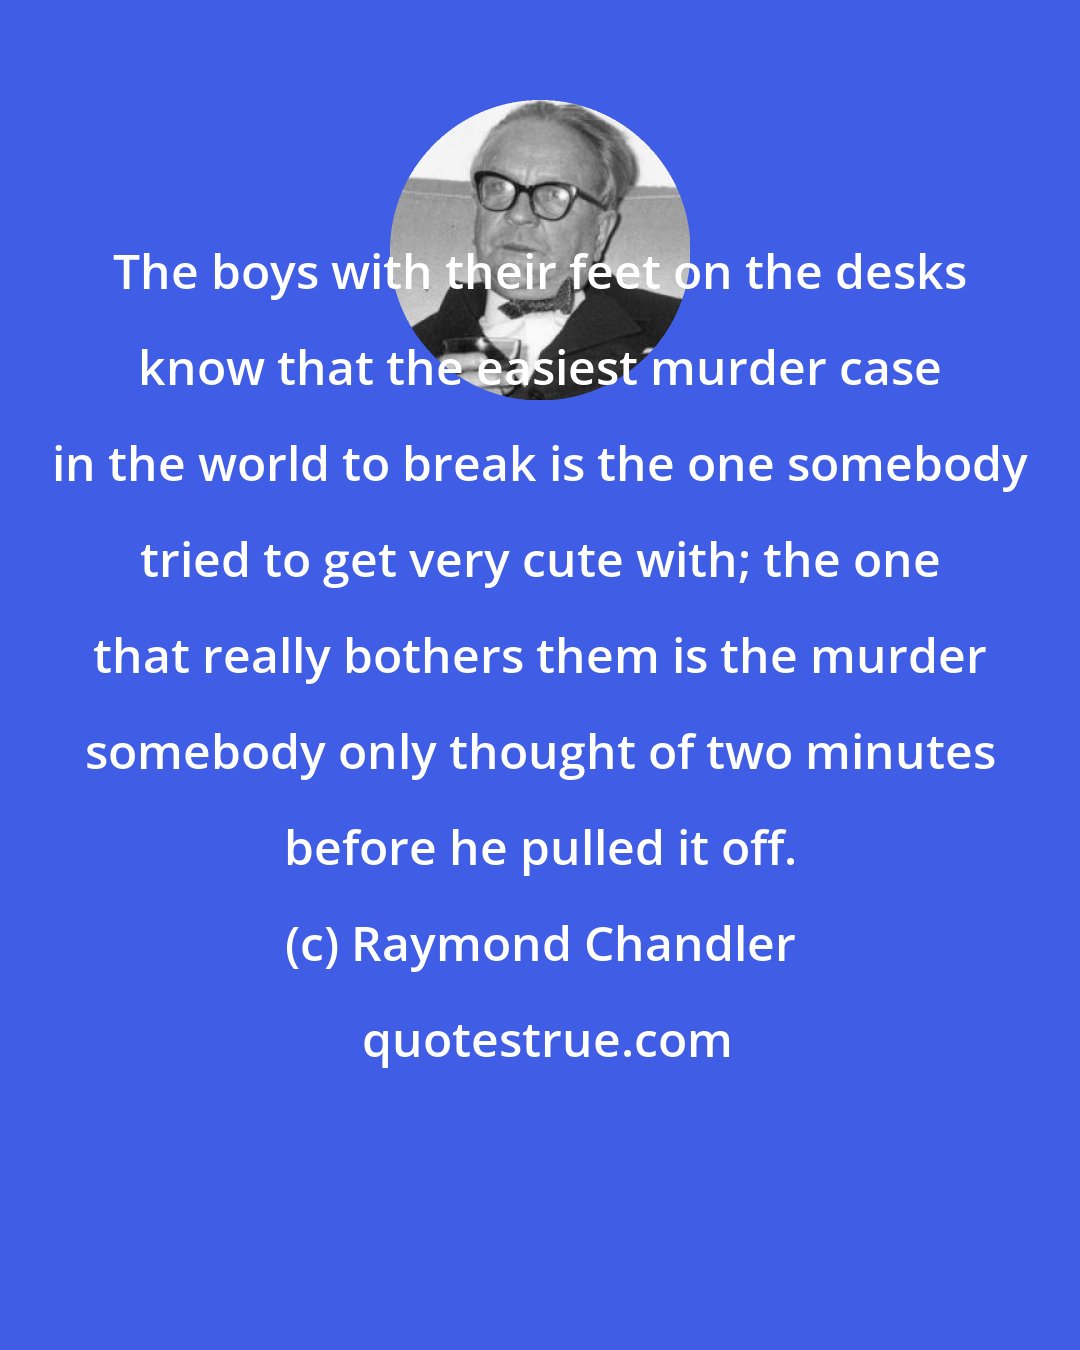 Raymond Chandler: The boys with their feet on the desks know that the easiest murder case in the world to break is the one somebody tried to get very cute with; the one that really bothers them is the murder somebody only thought of two minutes before he pulled it off.